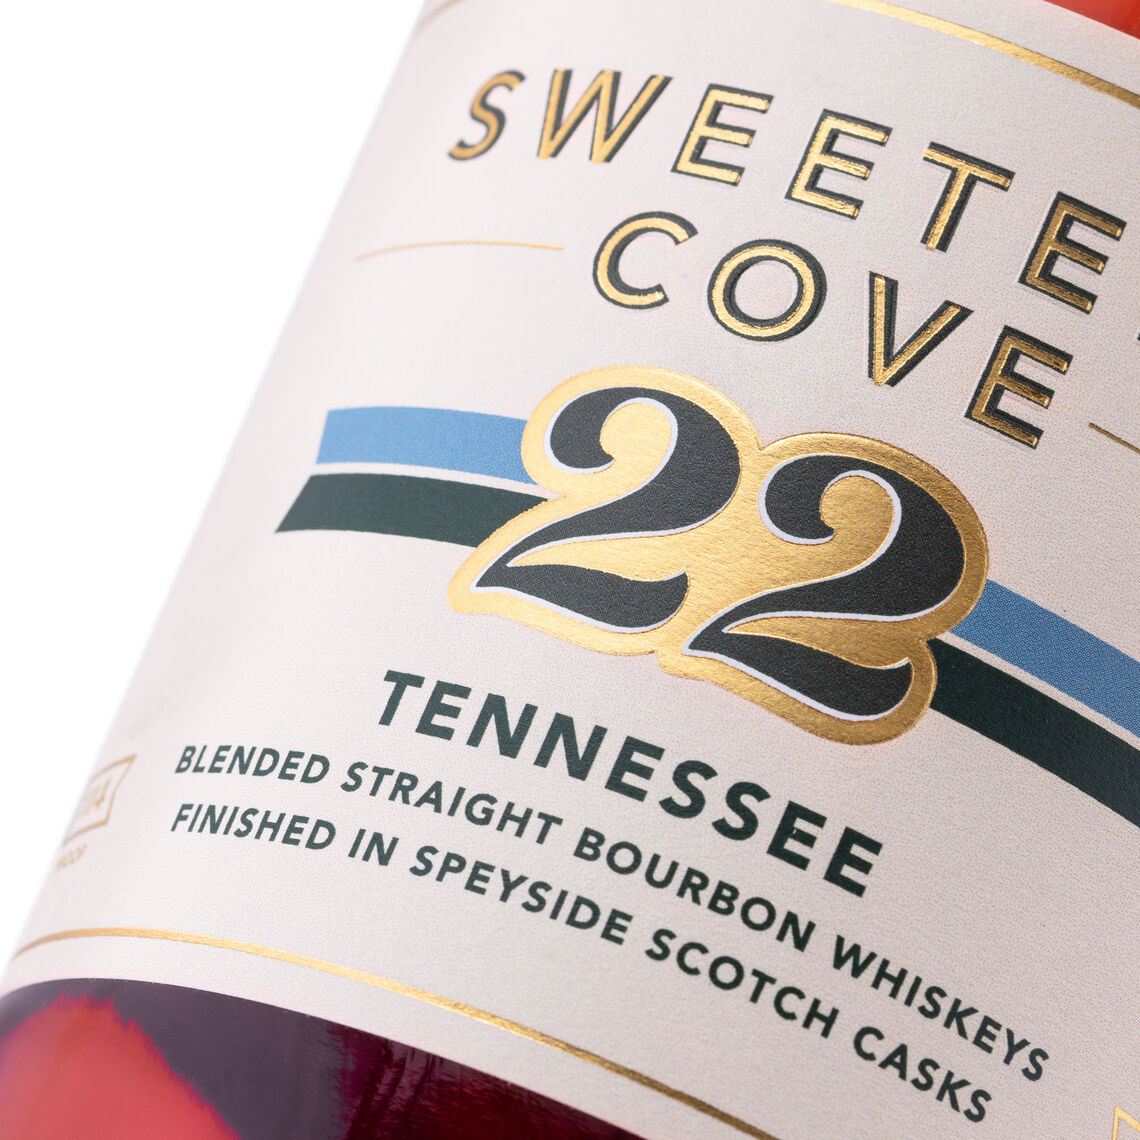 Sweetens Cove 22 Tennessee Bourbon